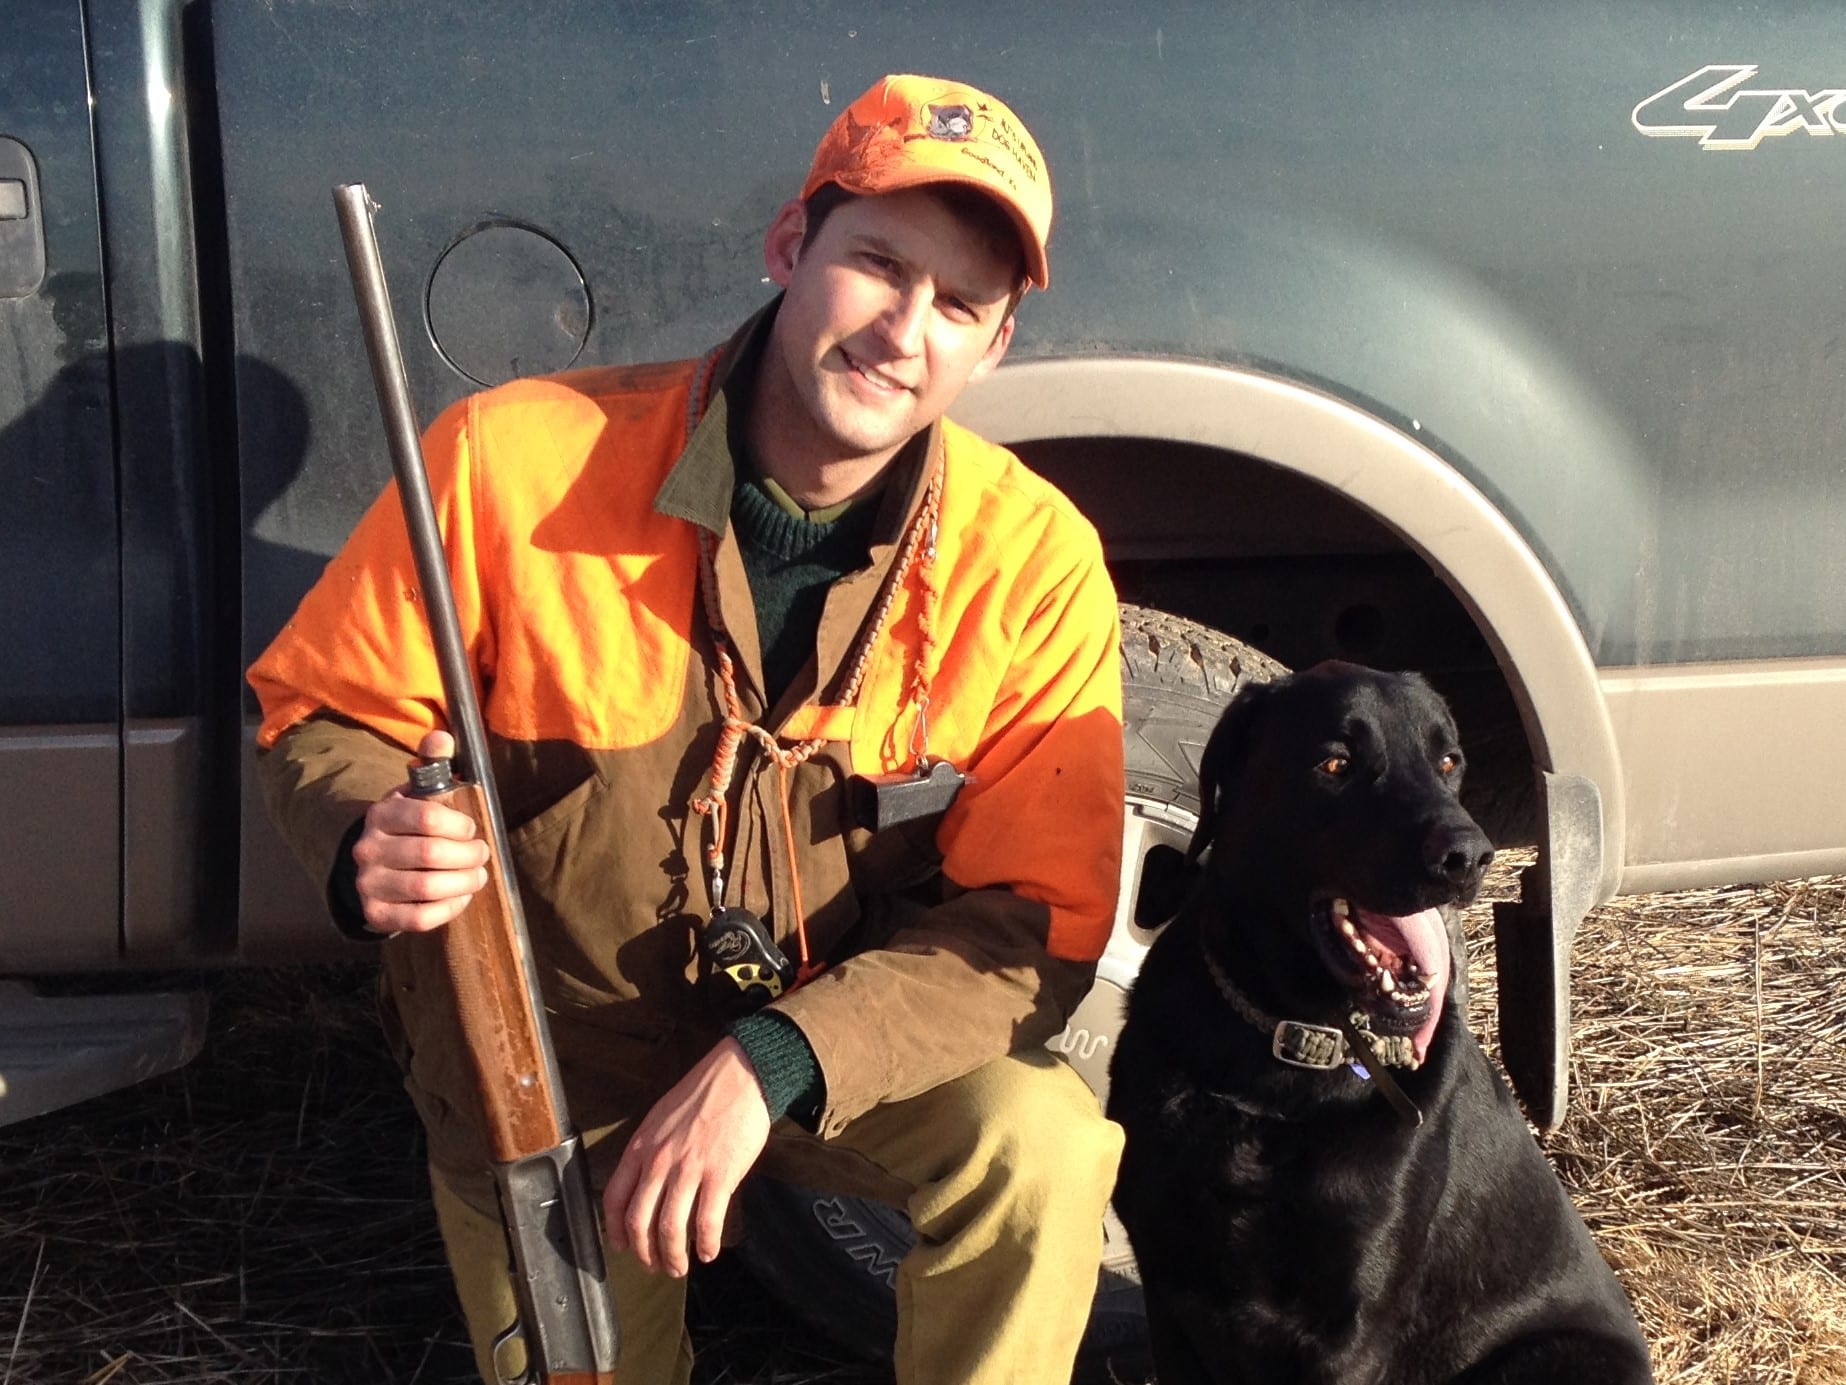 San Antonio Eviction Attorney Nathaniel Gilbert is an avid hunter and outdoorsman, advocating for hunting and fishing rights both in and out of the courtroom. When considering your landlord tenant attorney, know that Nathaniel Gilbert supports your outdoor passions as well.